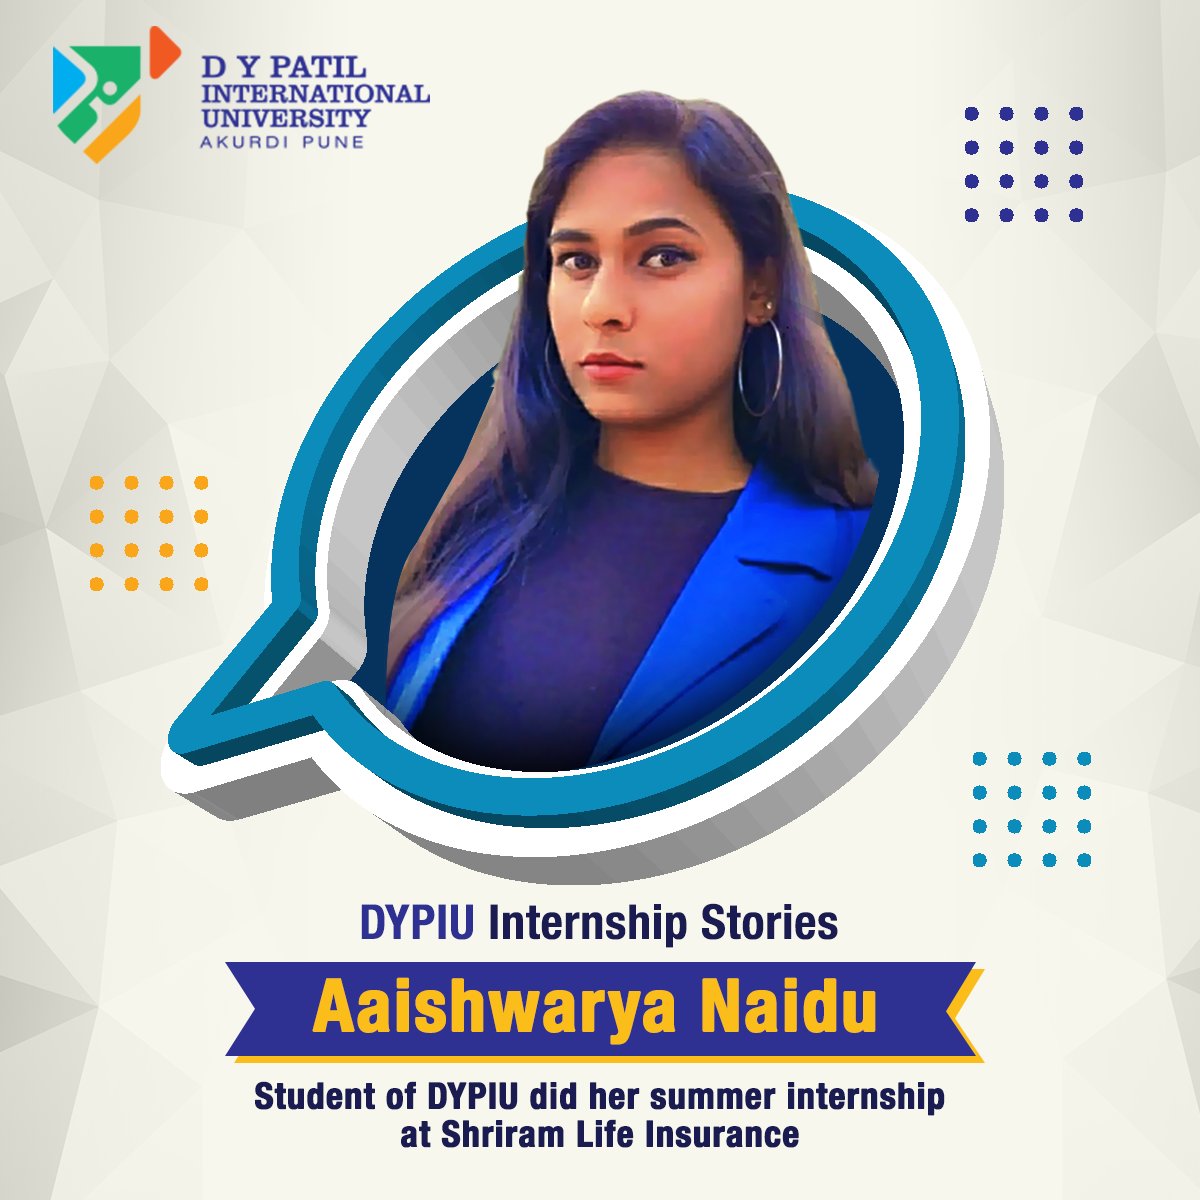 We caught up with a current #DYPIU student, Aaishwarya Naidu, BBA (3rd-year), who has completed her internship with Shriram Life Insurance, Mumbai. 

#DYPIU #InternshipStories #DYPIUInternships #StudentAchievements #AdmissionsOpen #ApplyNow #Pune